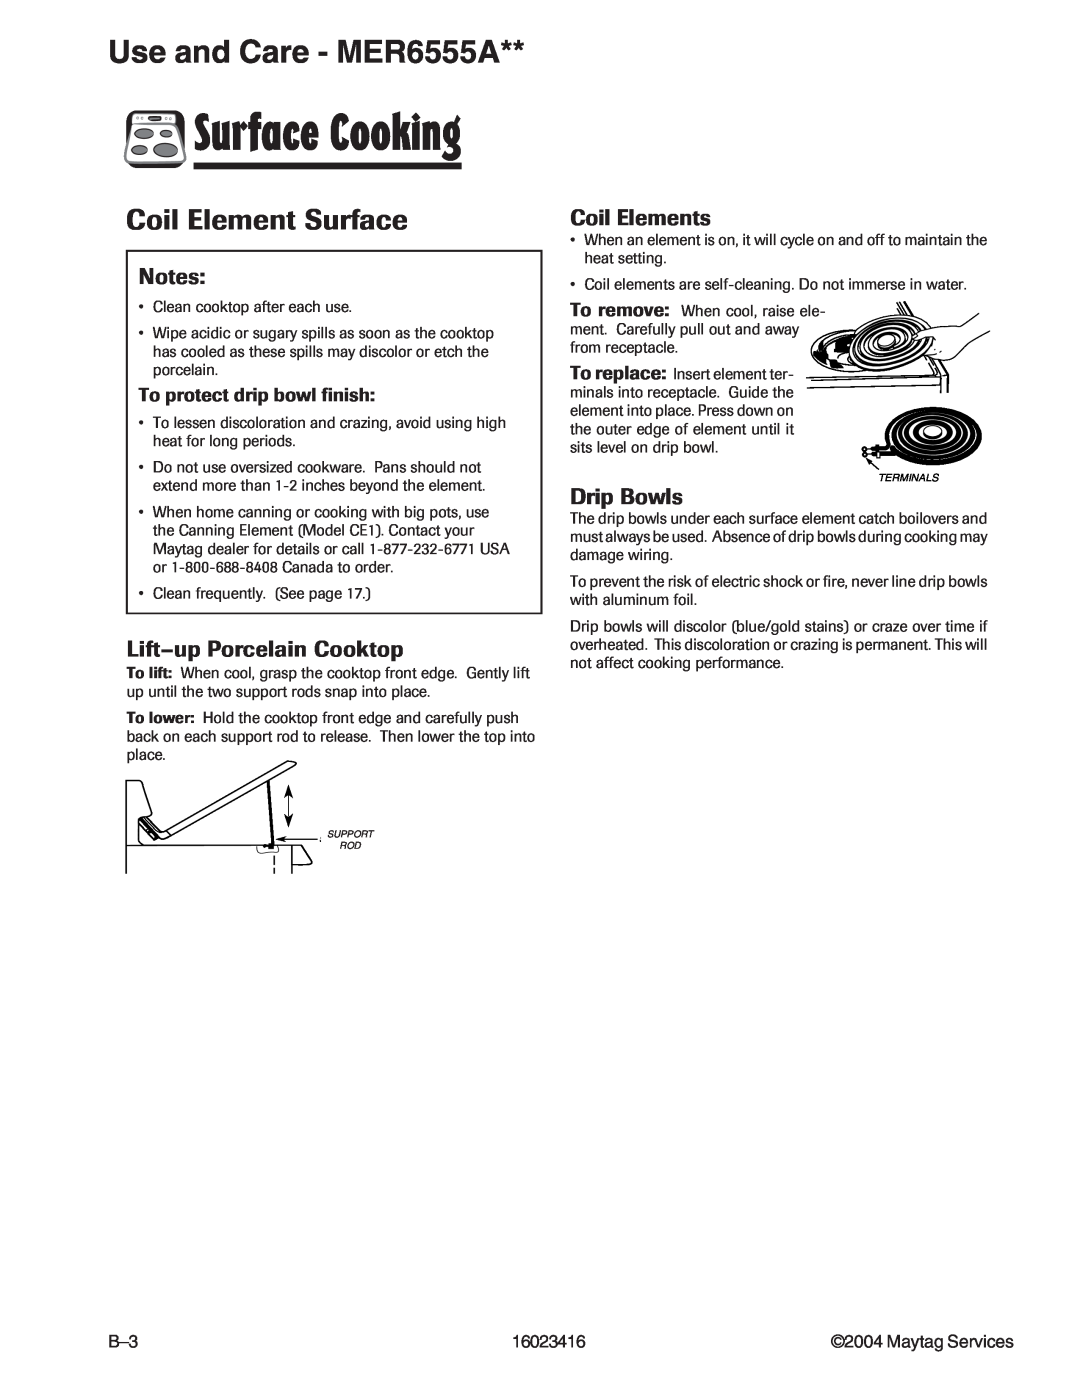 Maytag MER6775ACB/F/N/S/W, MER6555AAB/Q/W Coil Element Surface, Notes, Lift-upPorcelain Cooktop, Coil Elements, Drip Bowls 